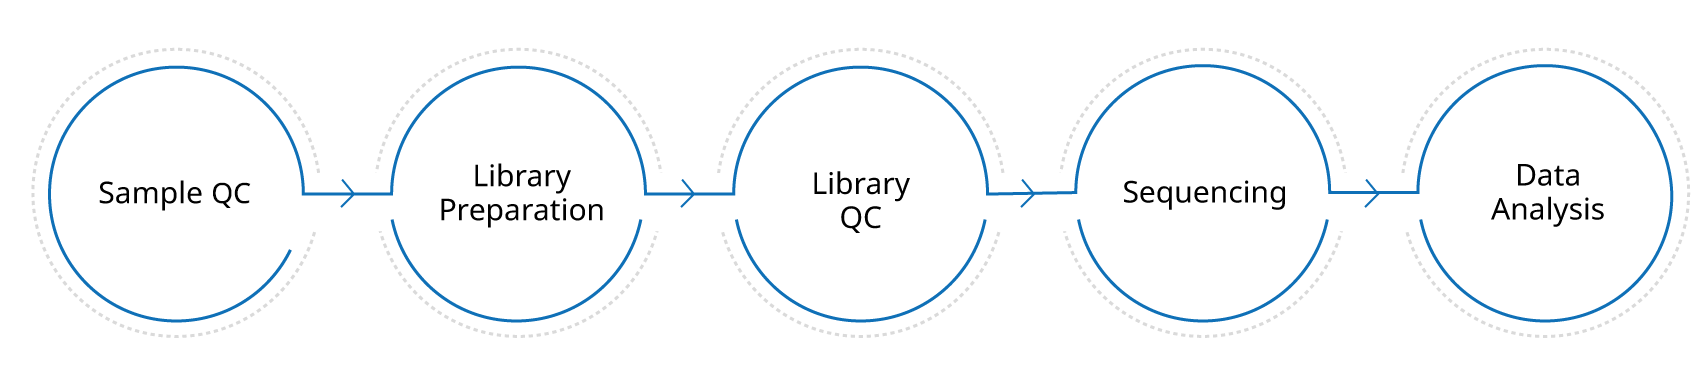 Sample QC, Library Preparation, Library QC, Sequencing, Data Analysis